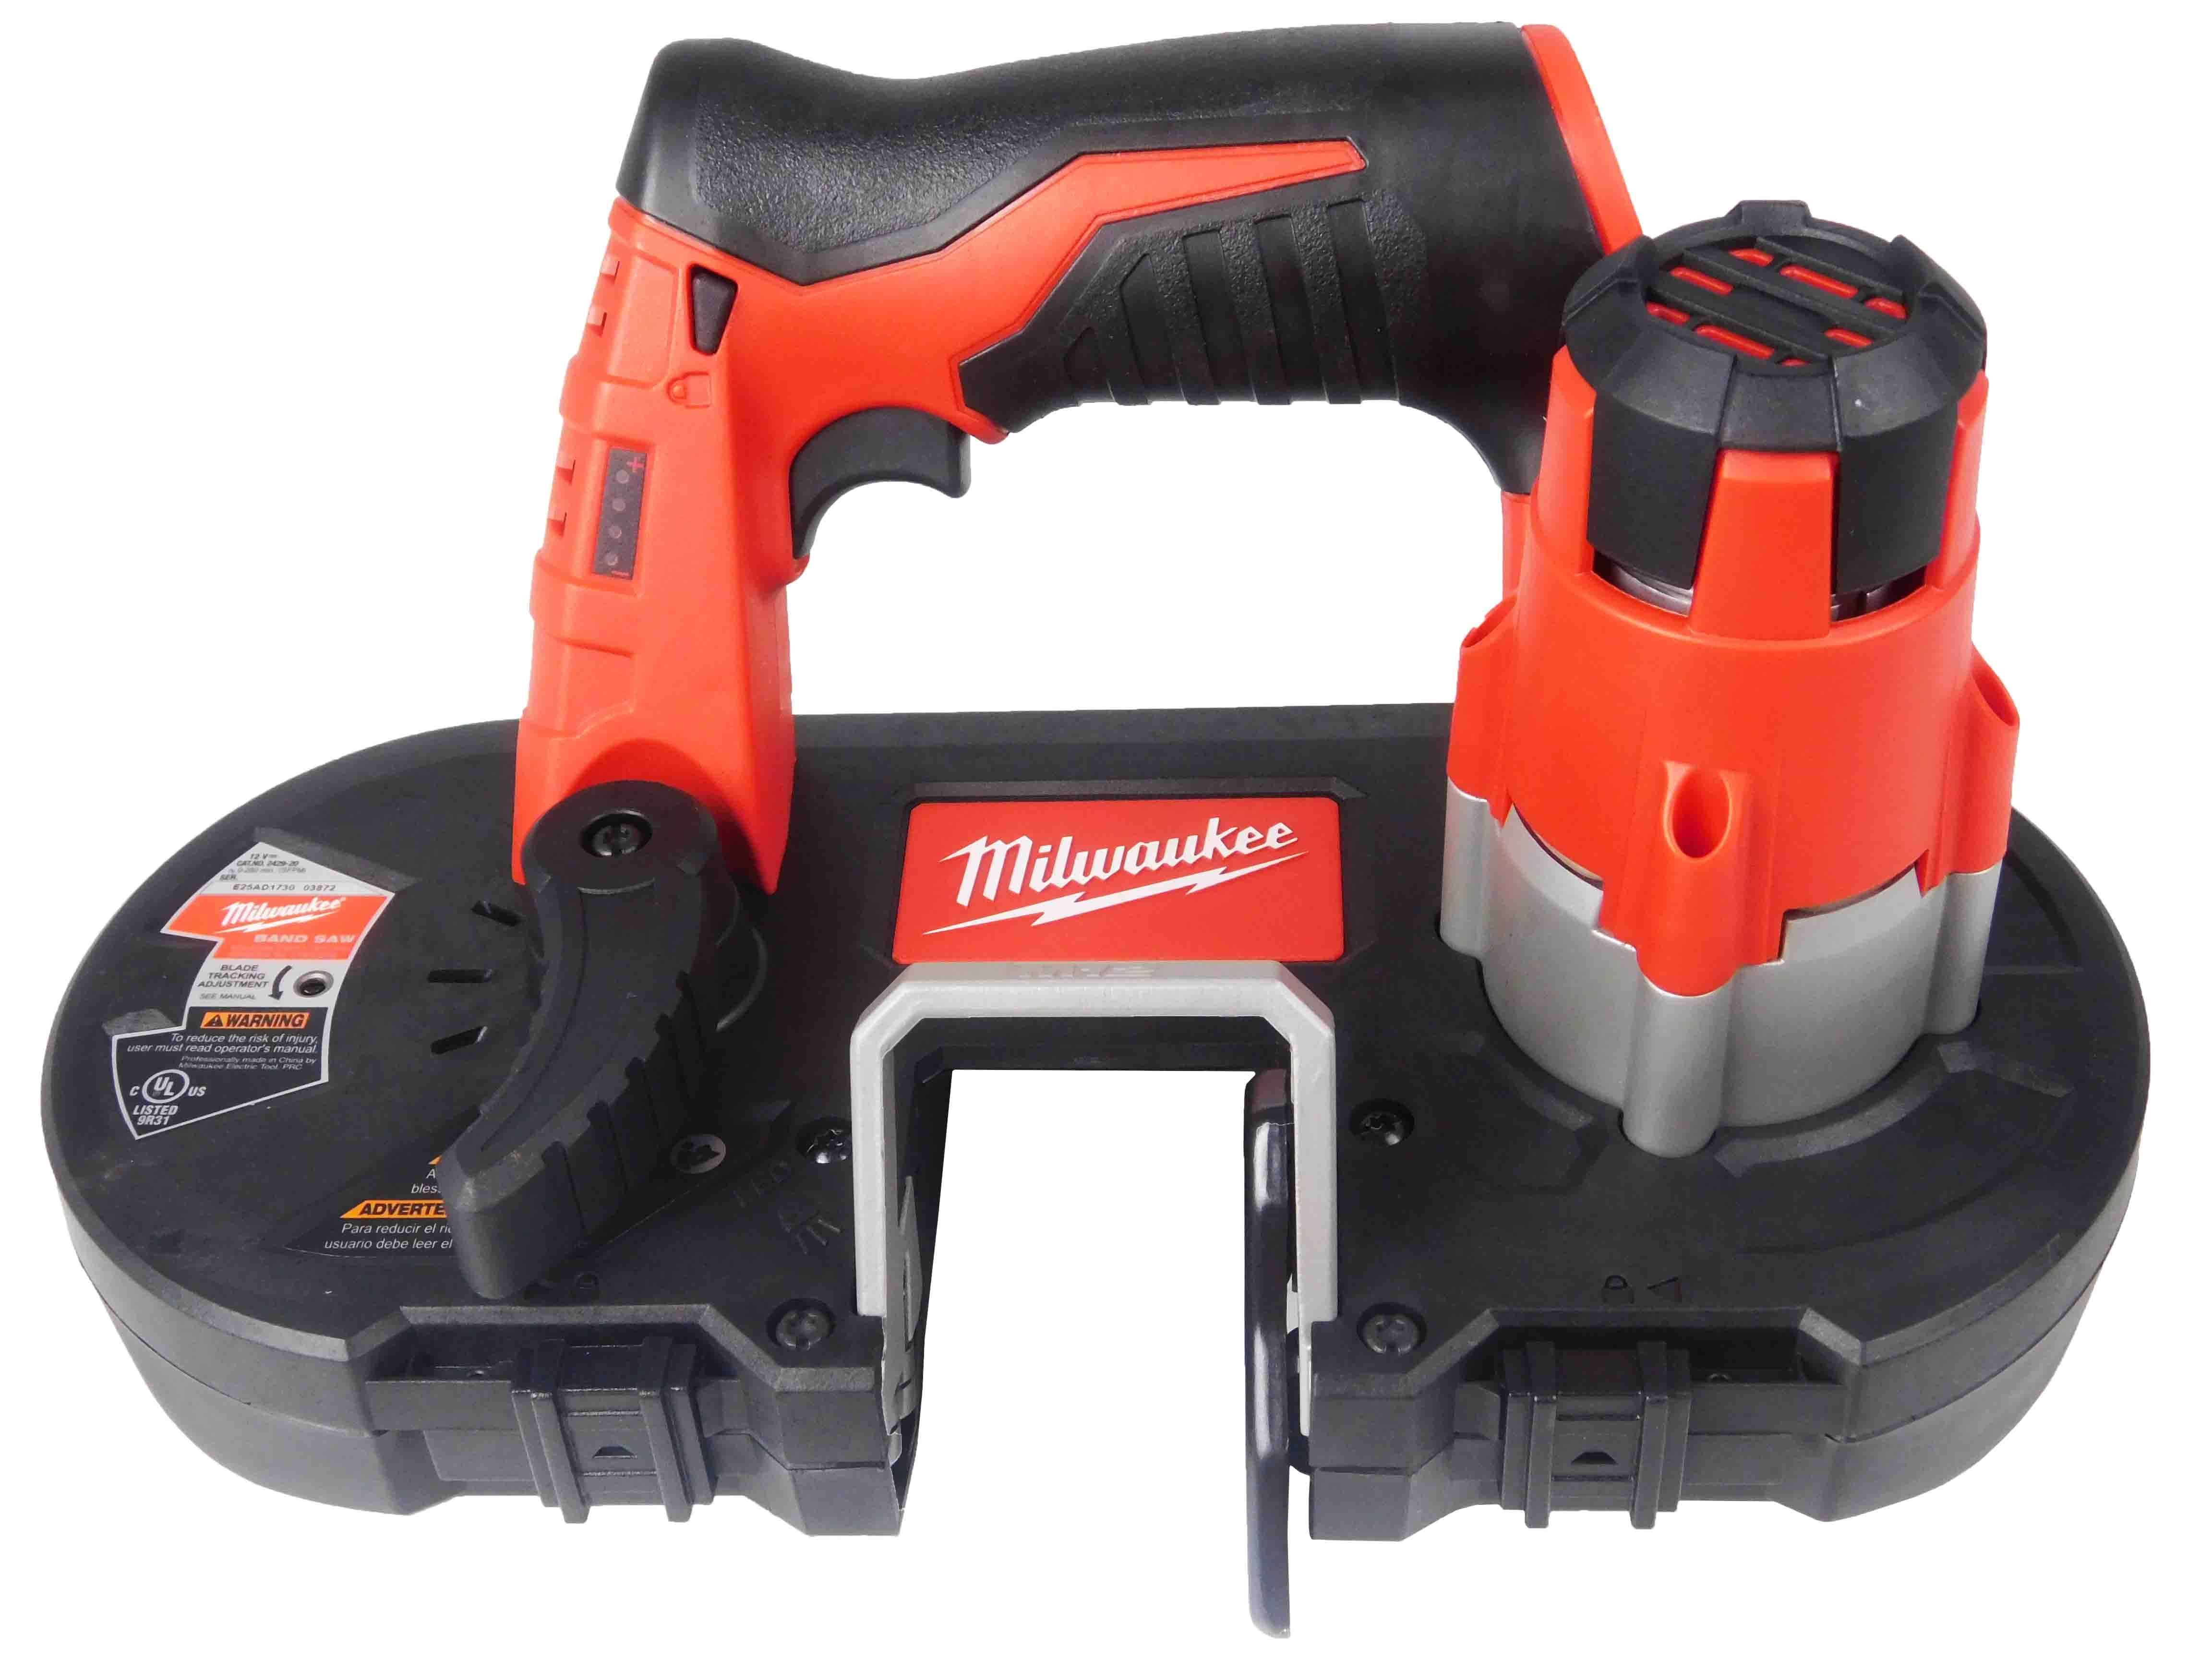 Milwaukee 2429-20-3 M12 Cordless Sub-Compact Band Saw 3x 45242262267 Tool Only 